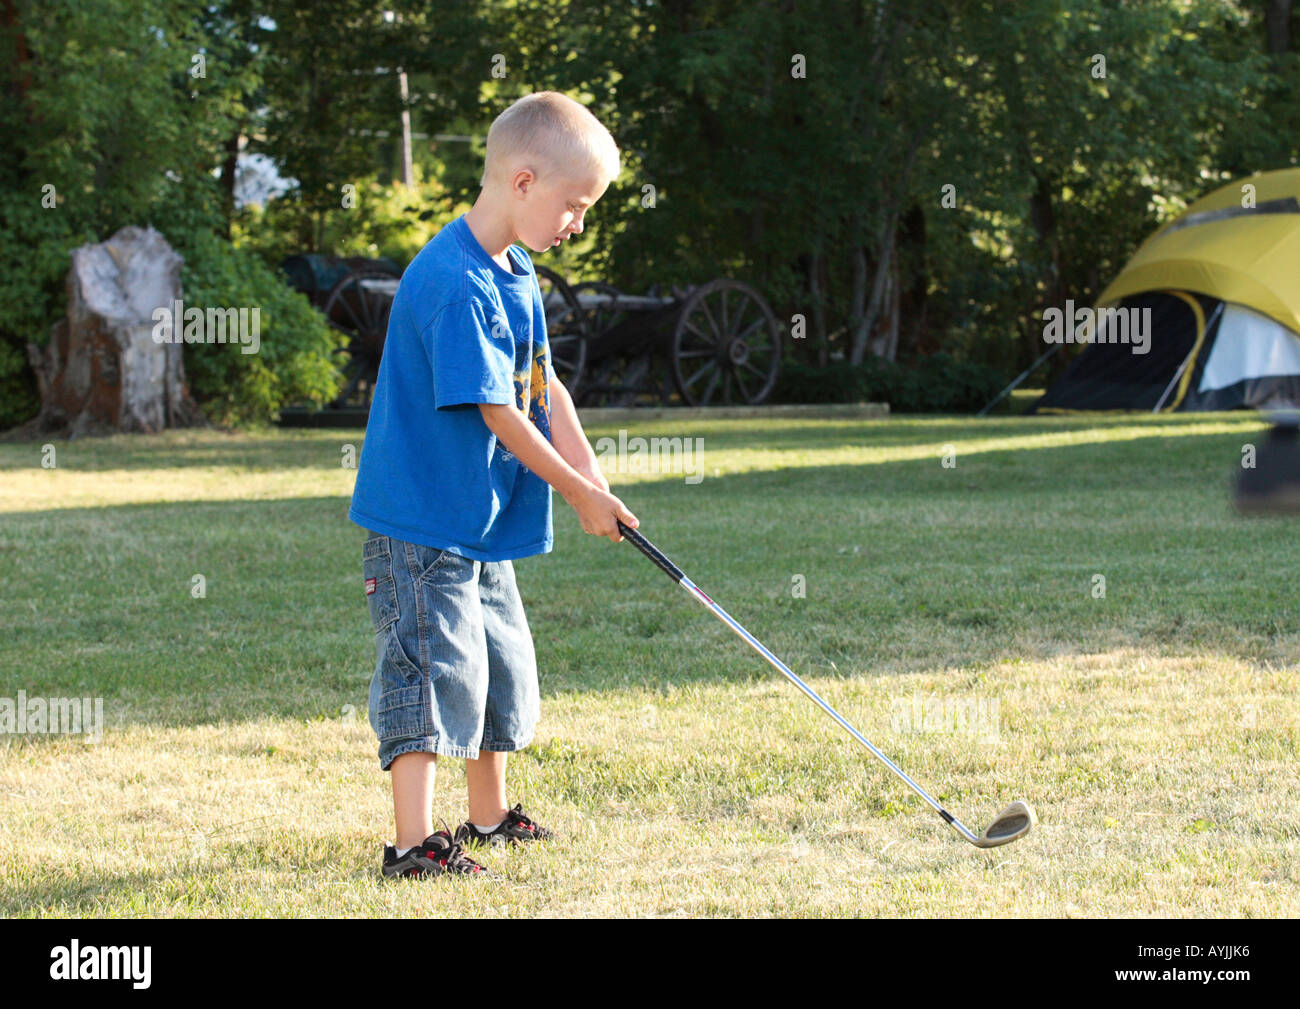 young boy prepares to hit golf ball Stock Photo